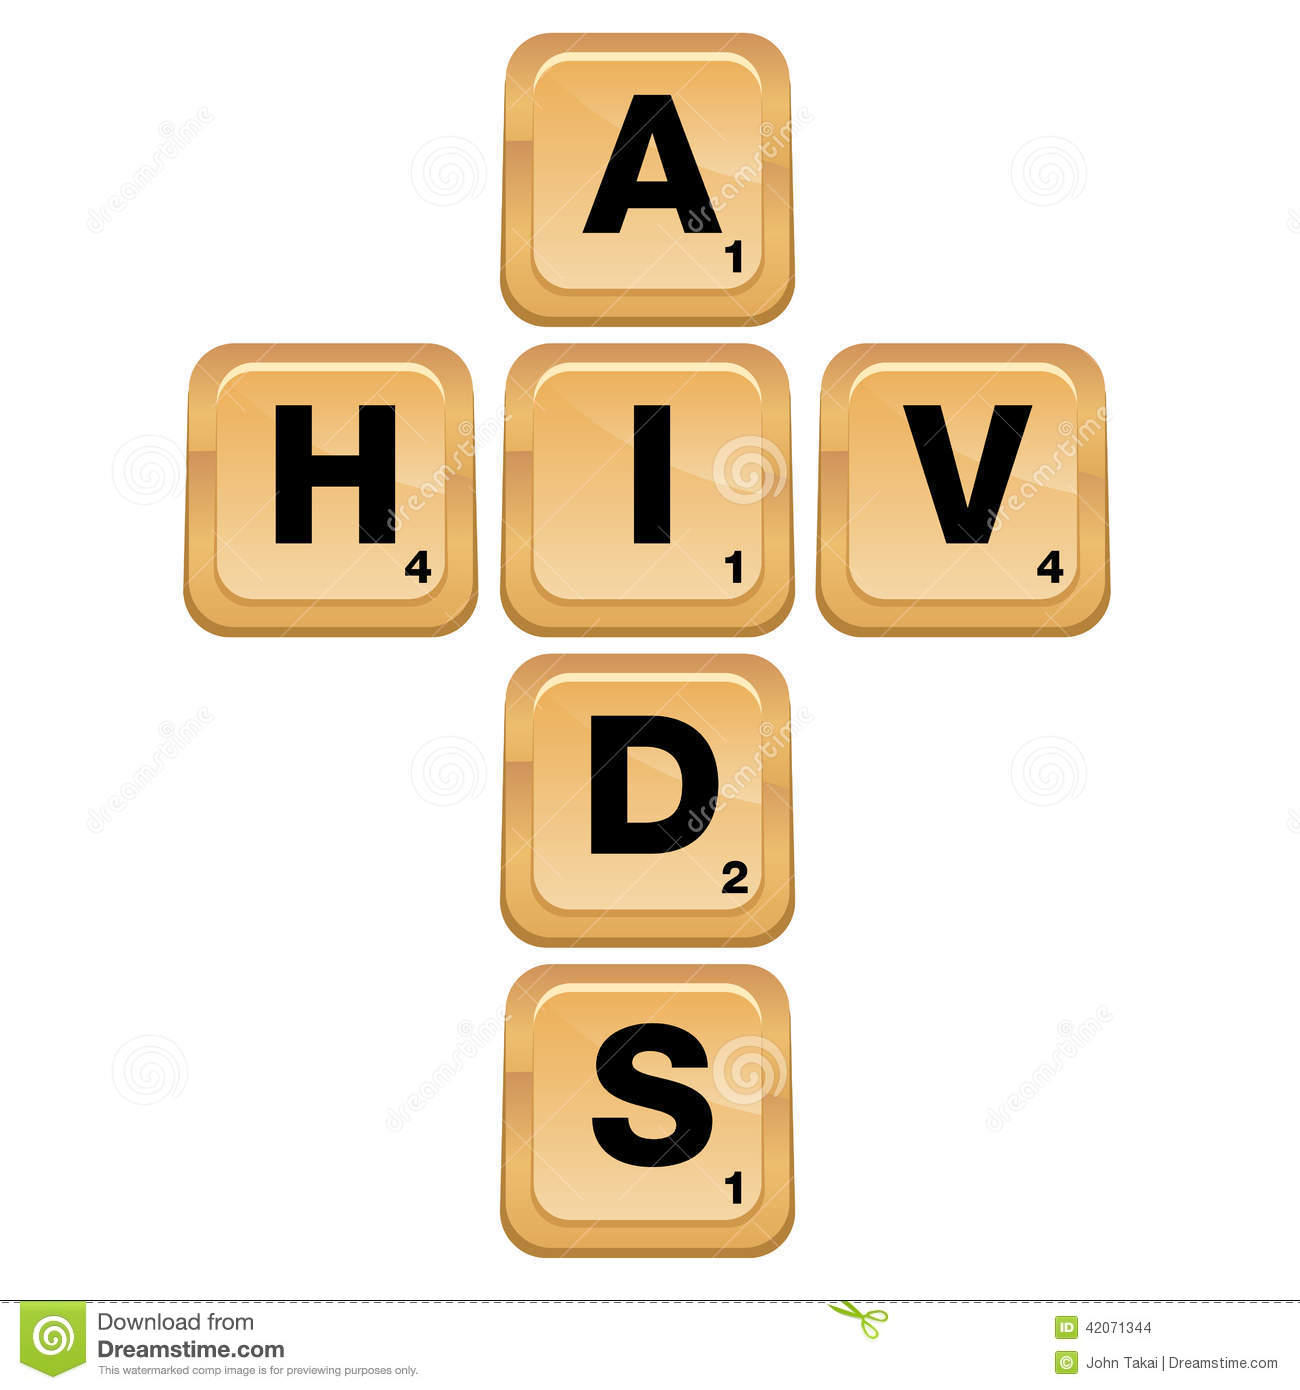 Hiv Aids Puzzle Stock Vector   Image  42071344